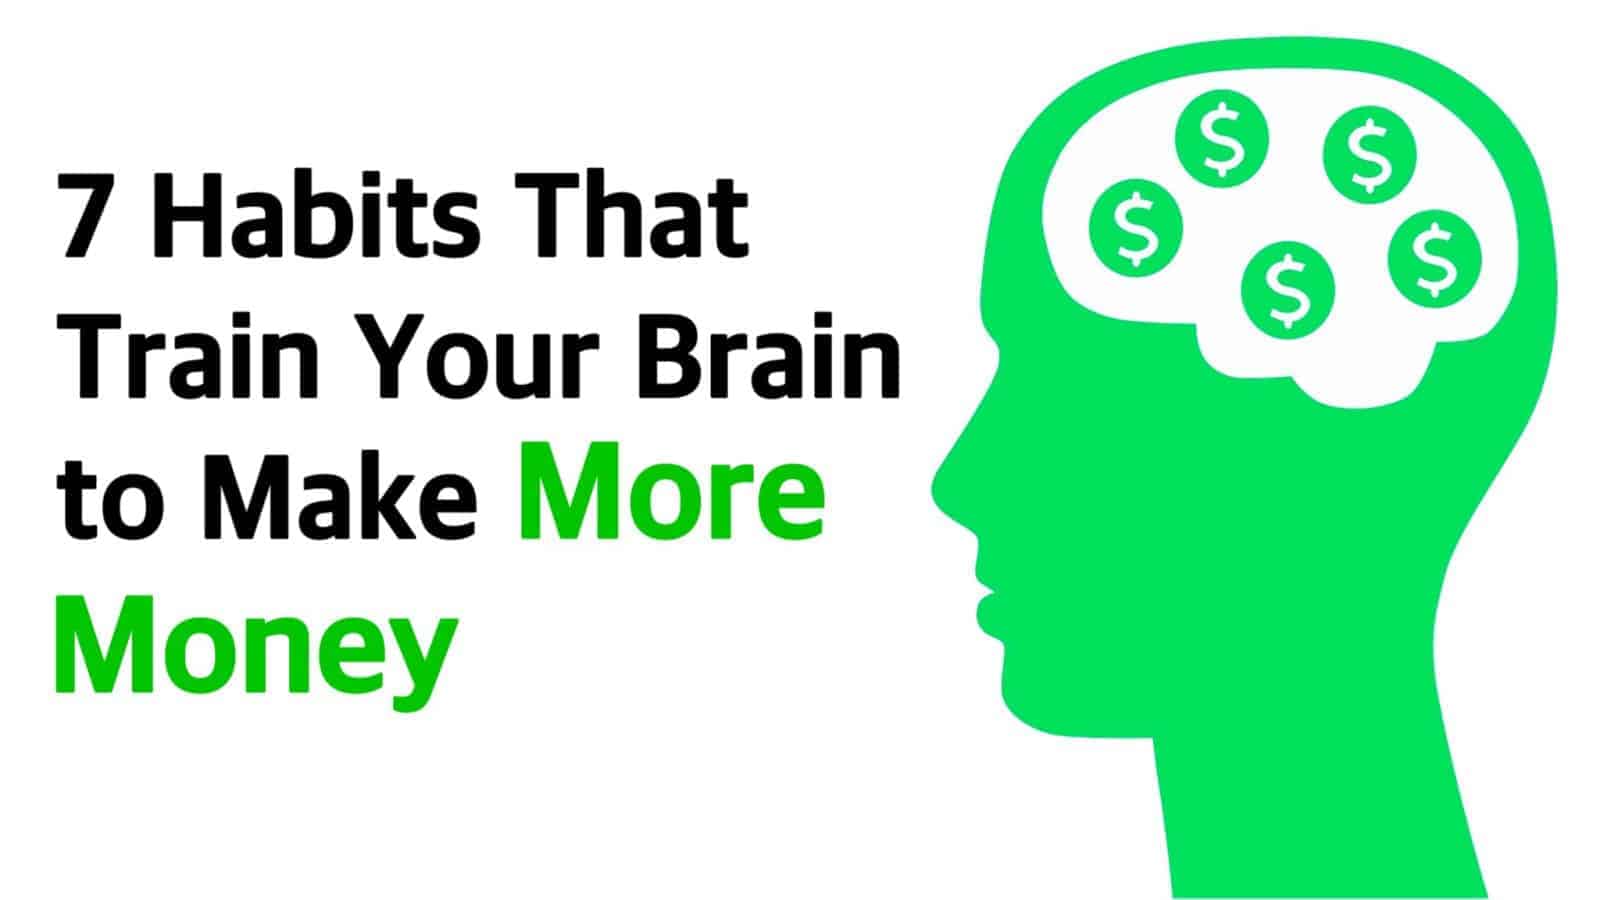 7 Habits That Train Your Brain to Make More Money